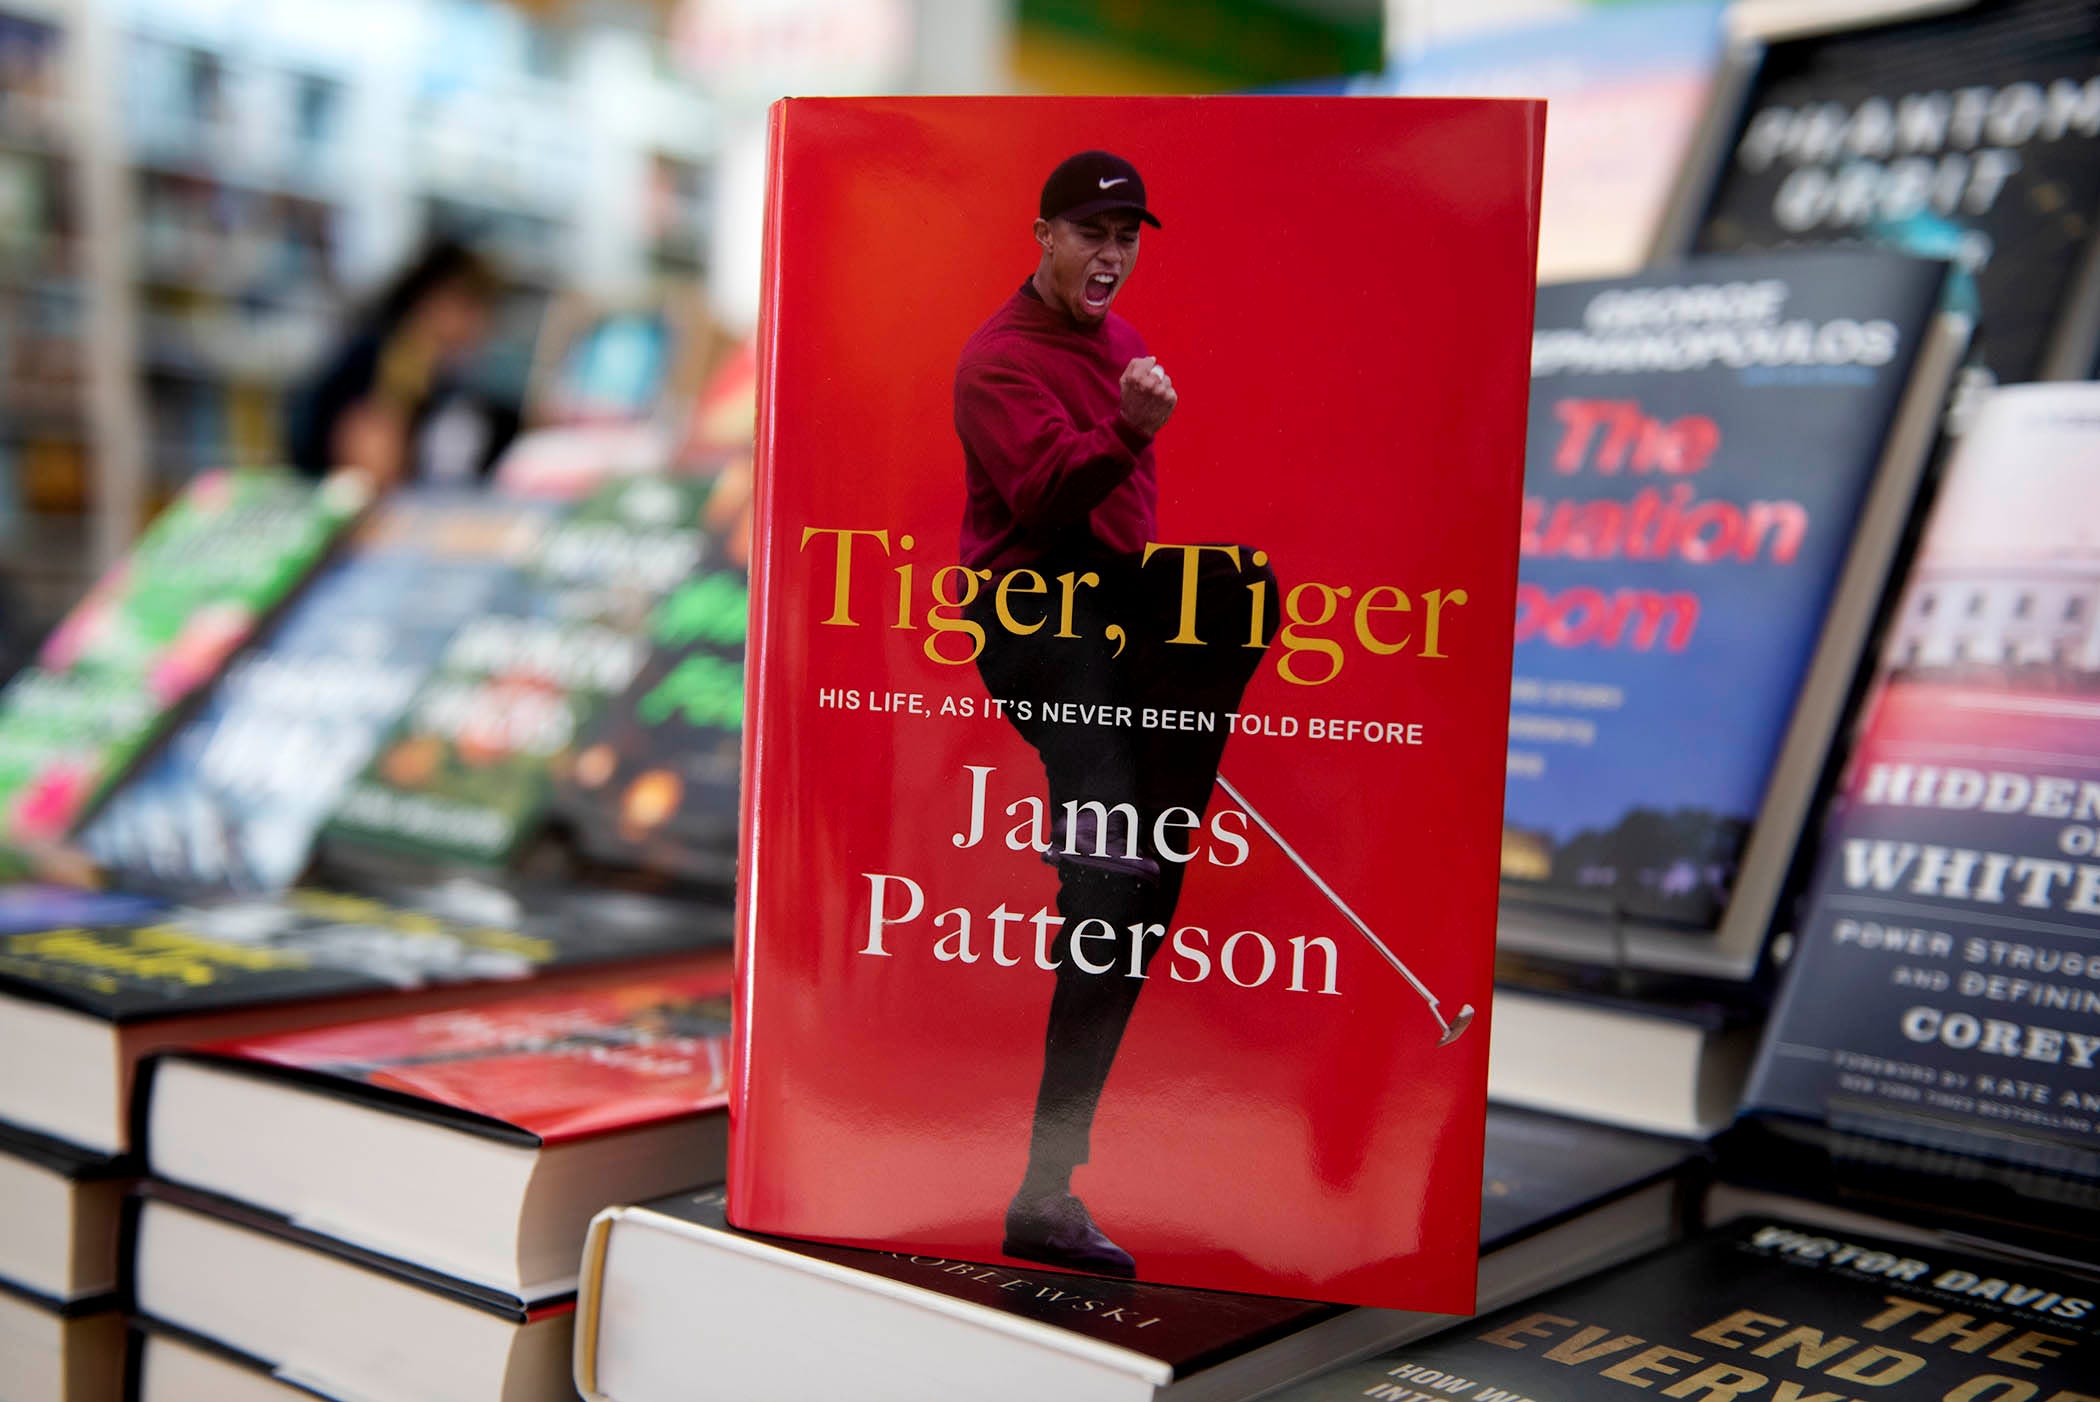 'An iconic figure': James Patterson pens new biography of golfing great Tiger Woods